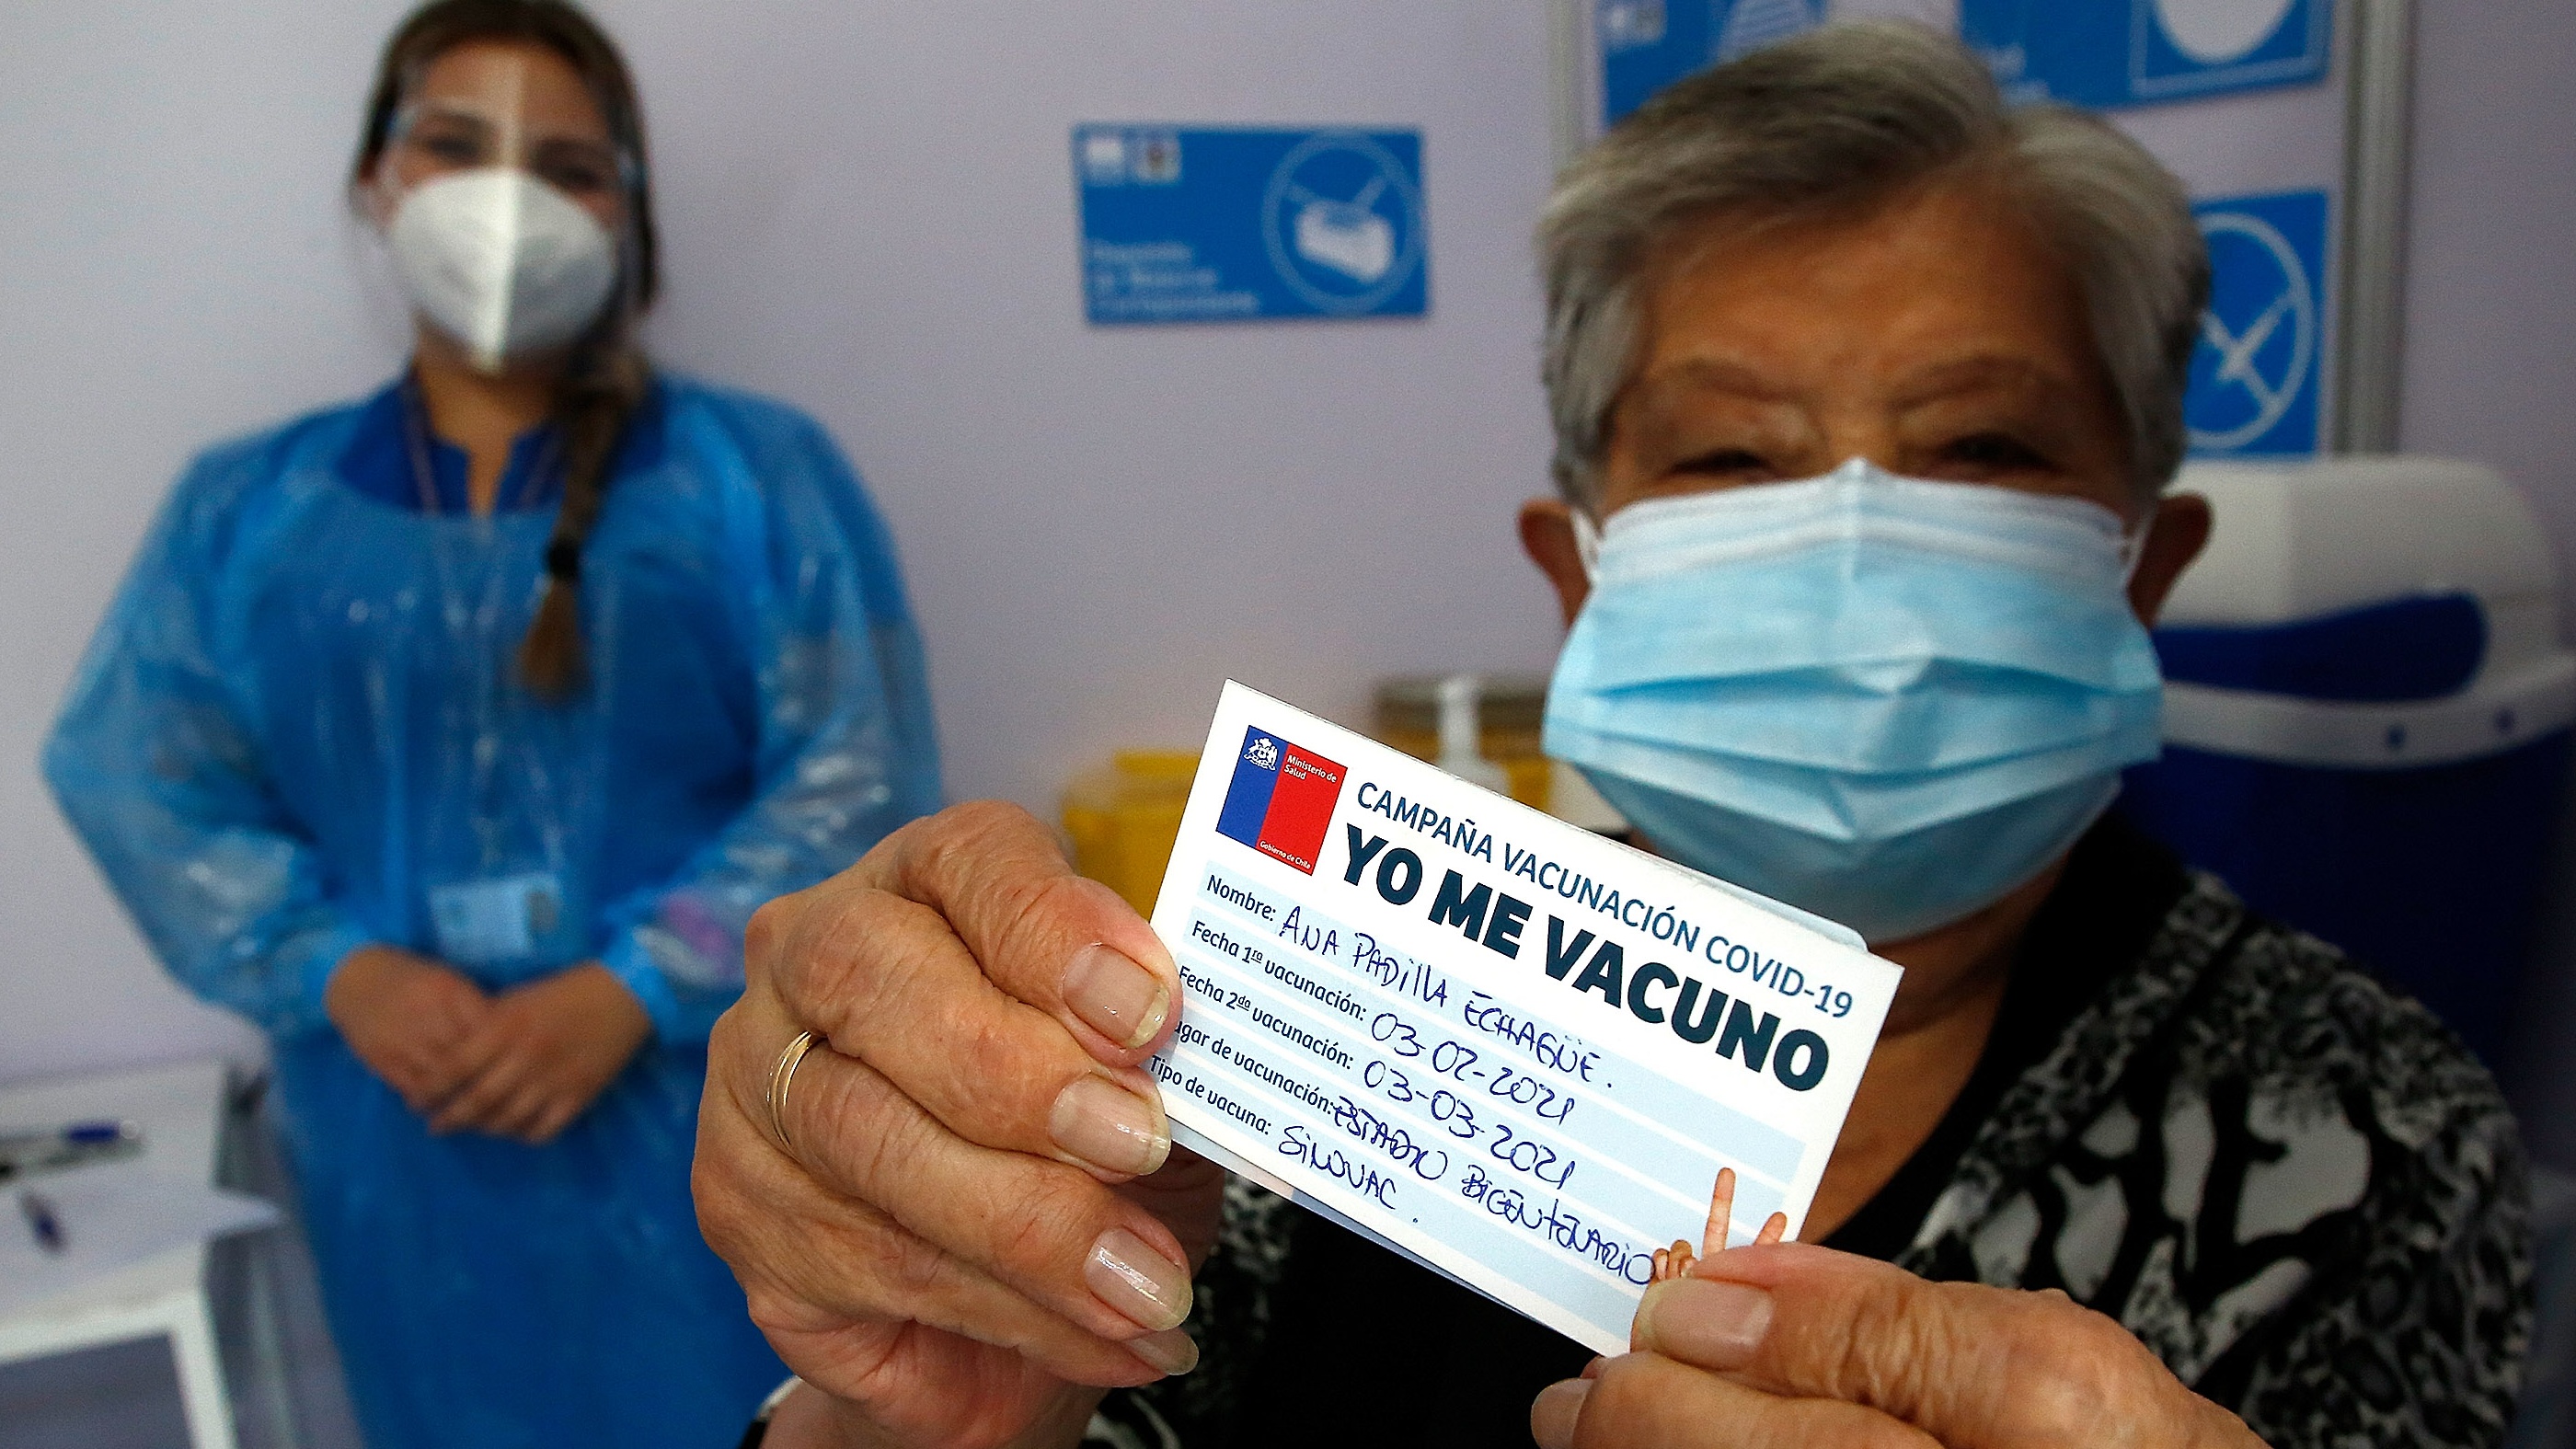 A Chilean woman shows her vaccination card